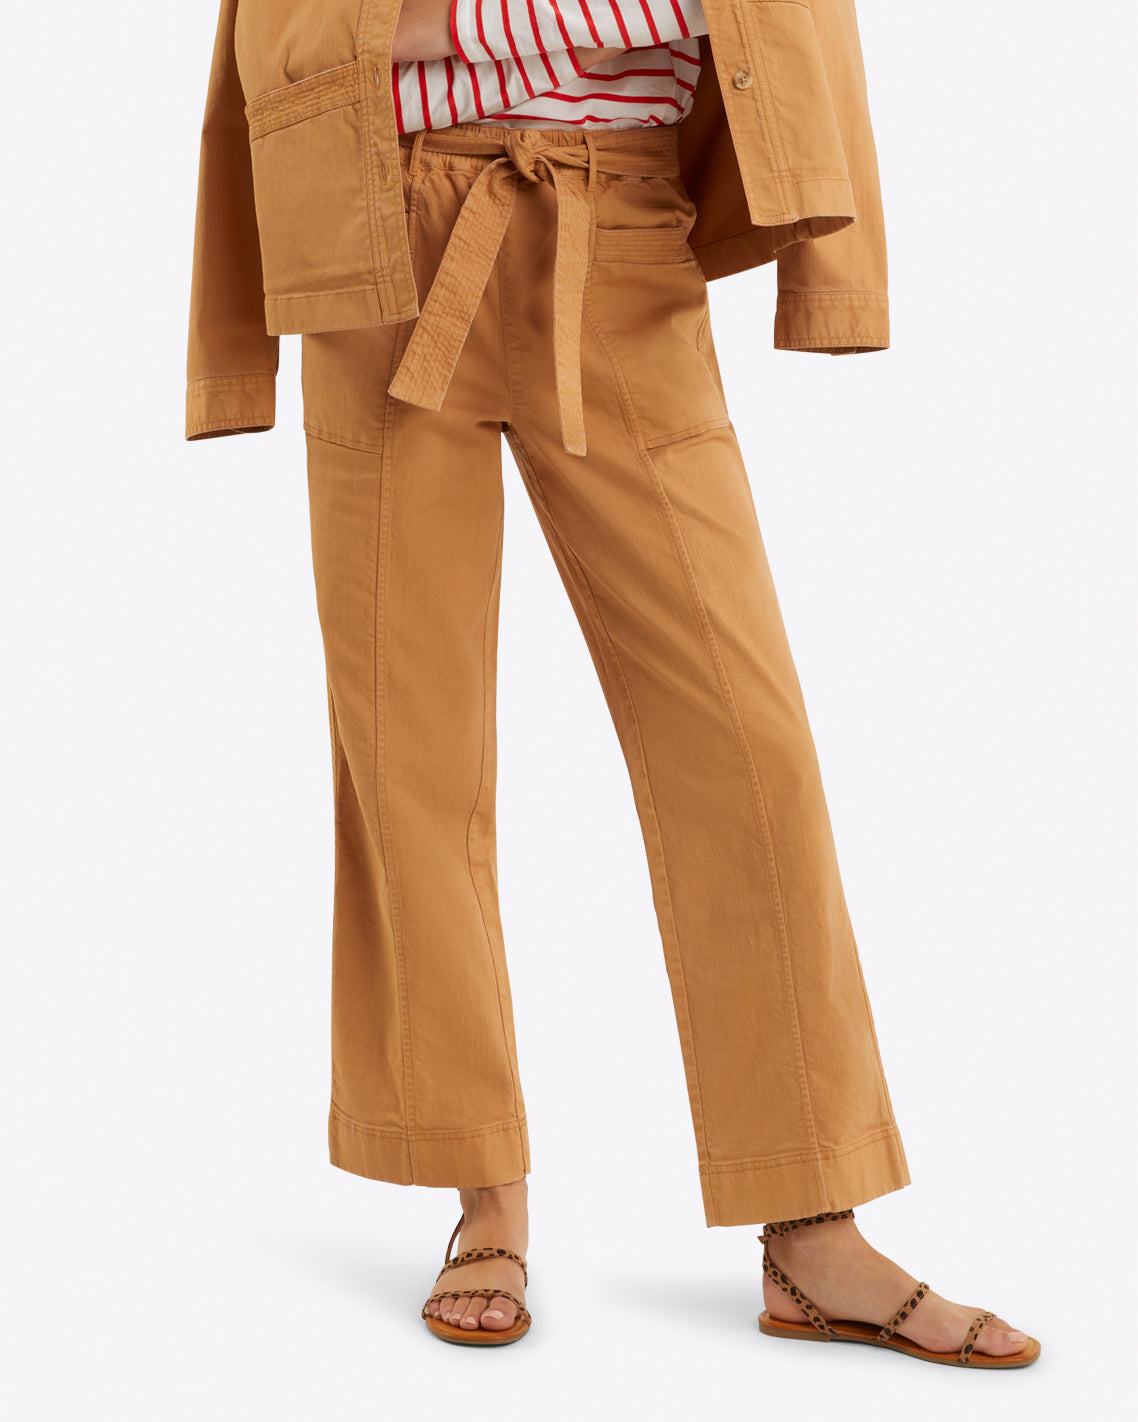 Utility Pant in Cotton Twill